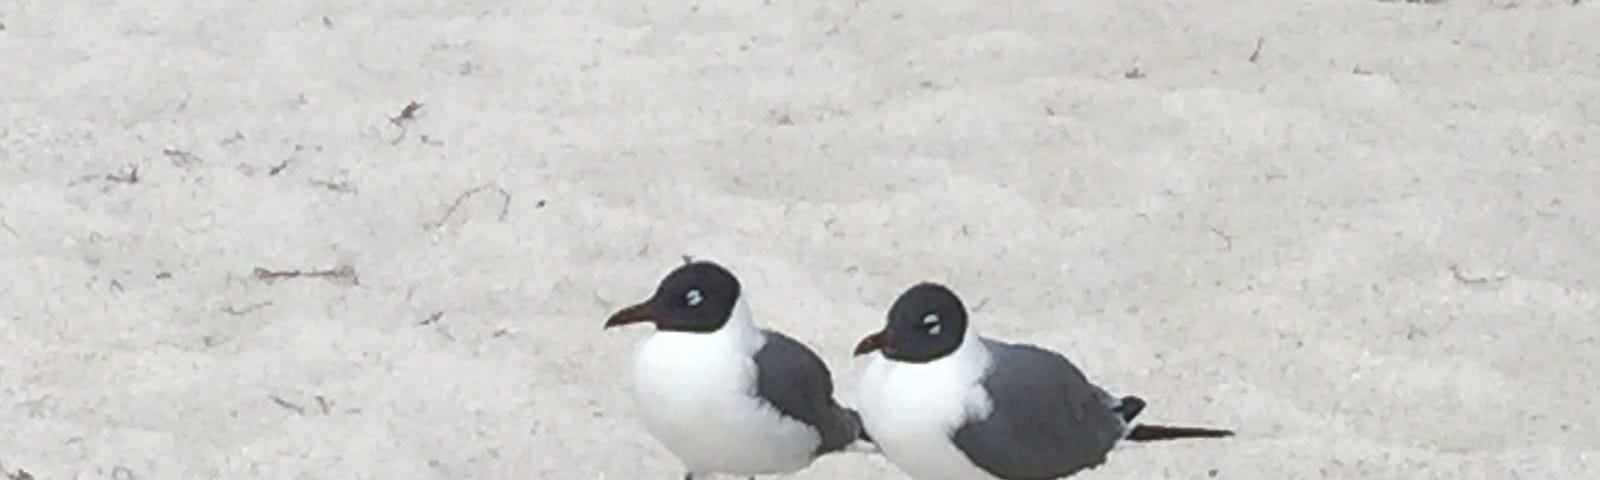 Two black-and-white seagulls side by side in the sand